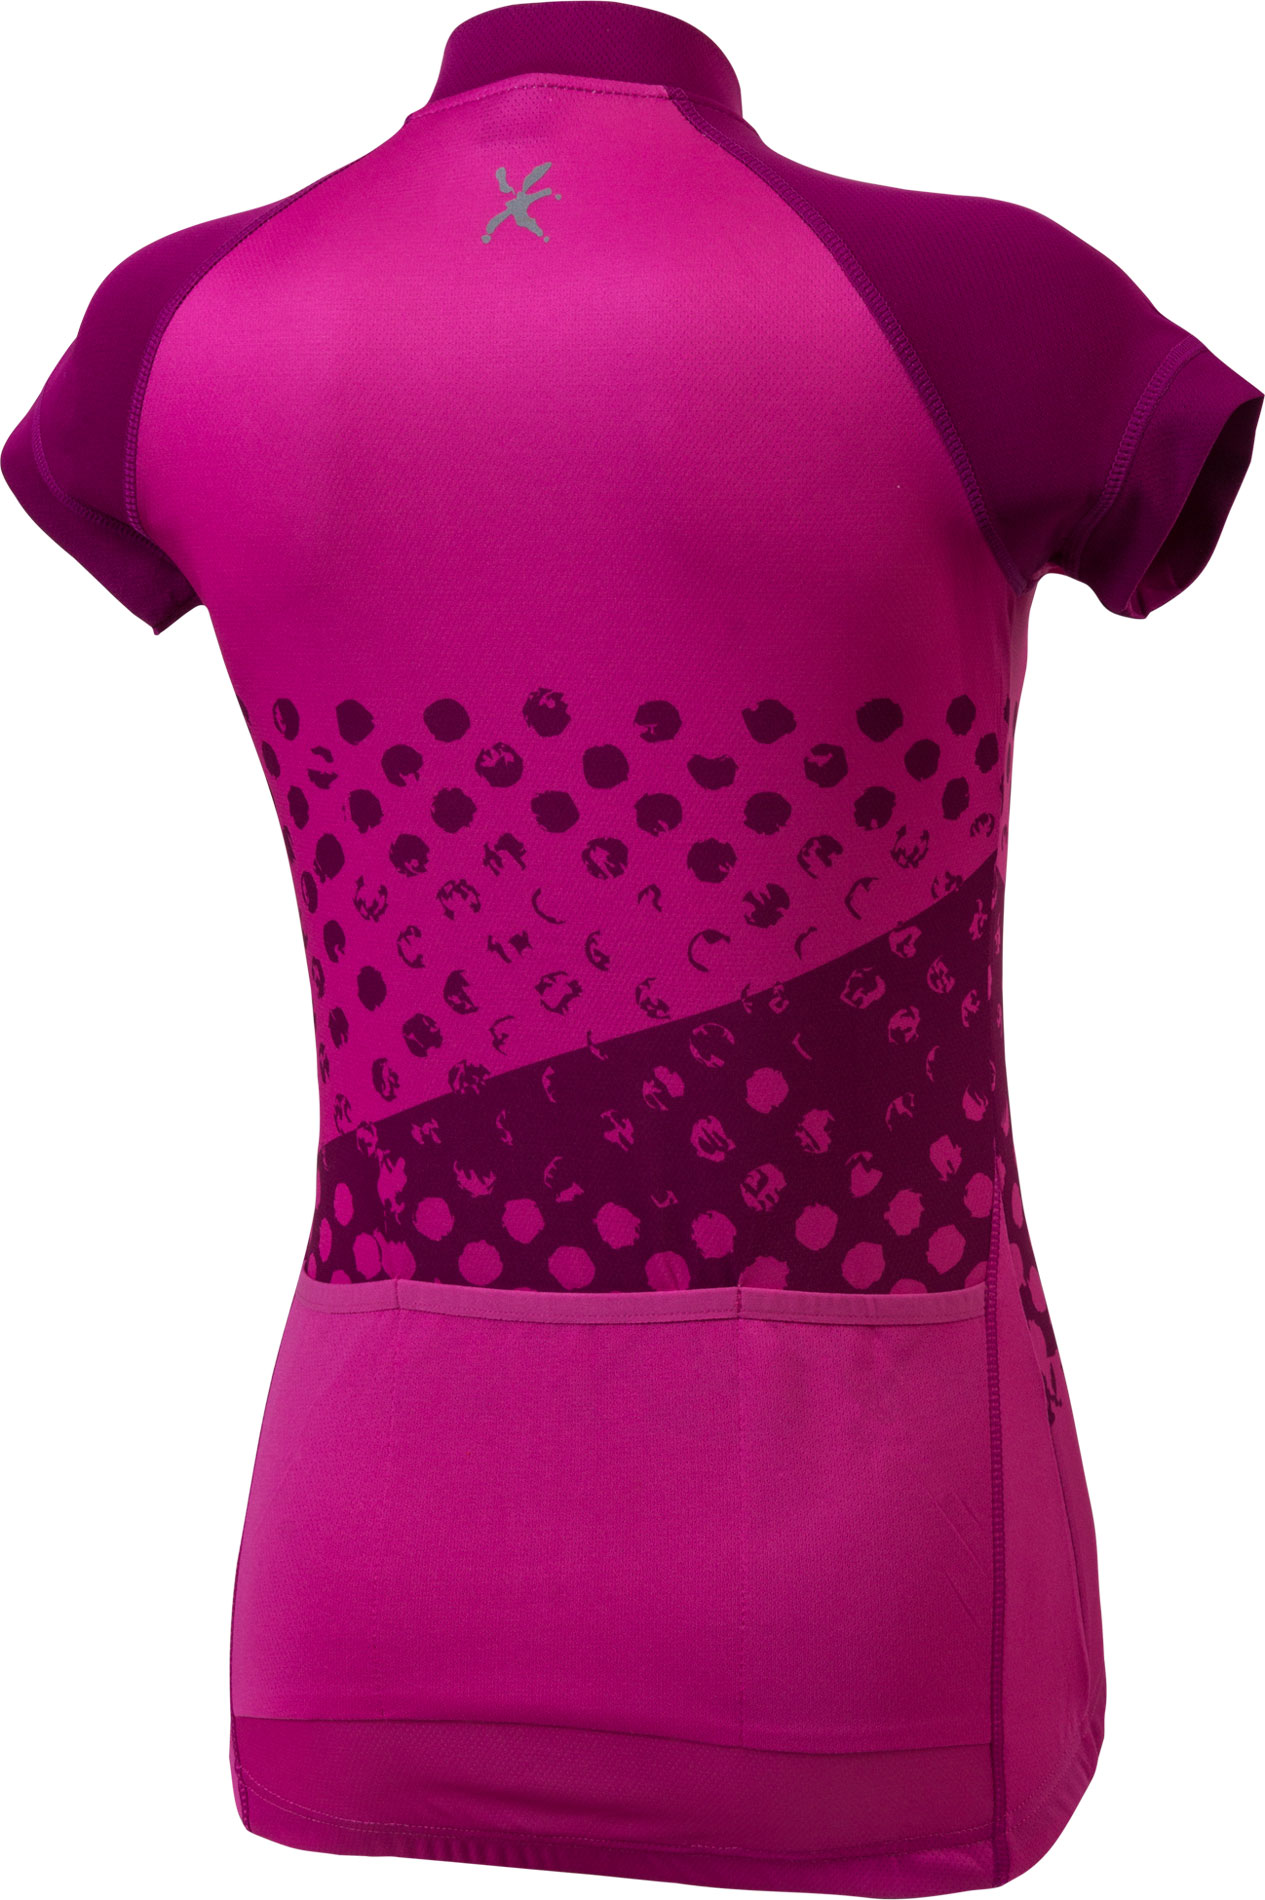 Women’s cycling jersey with a sublimation print